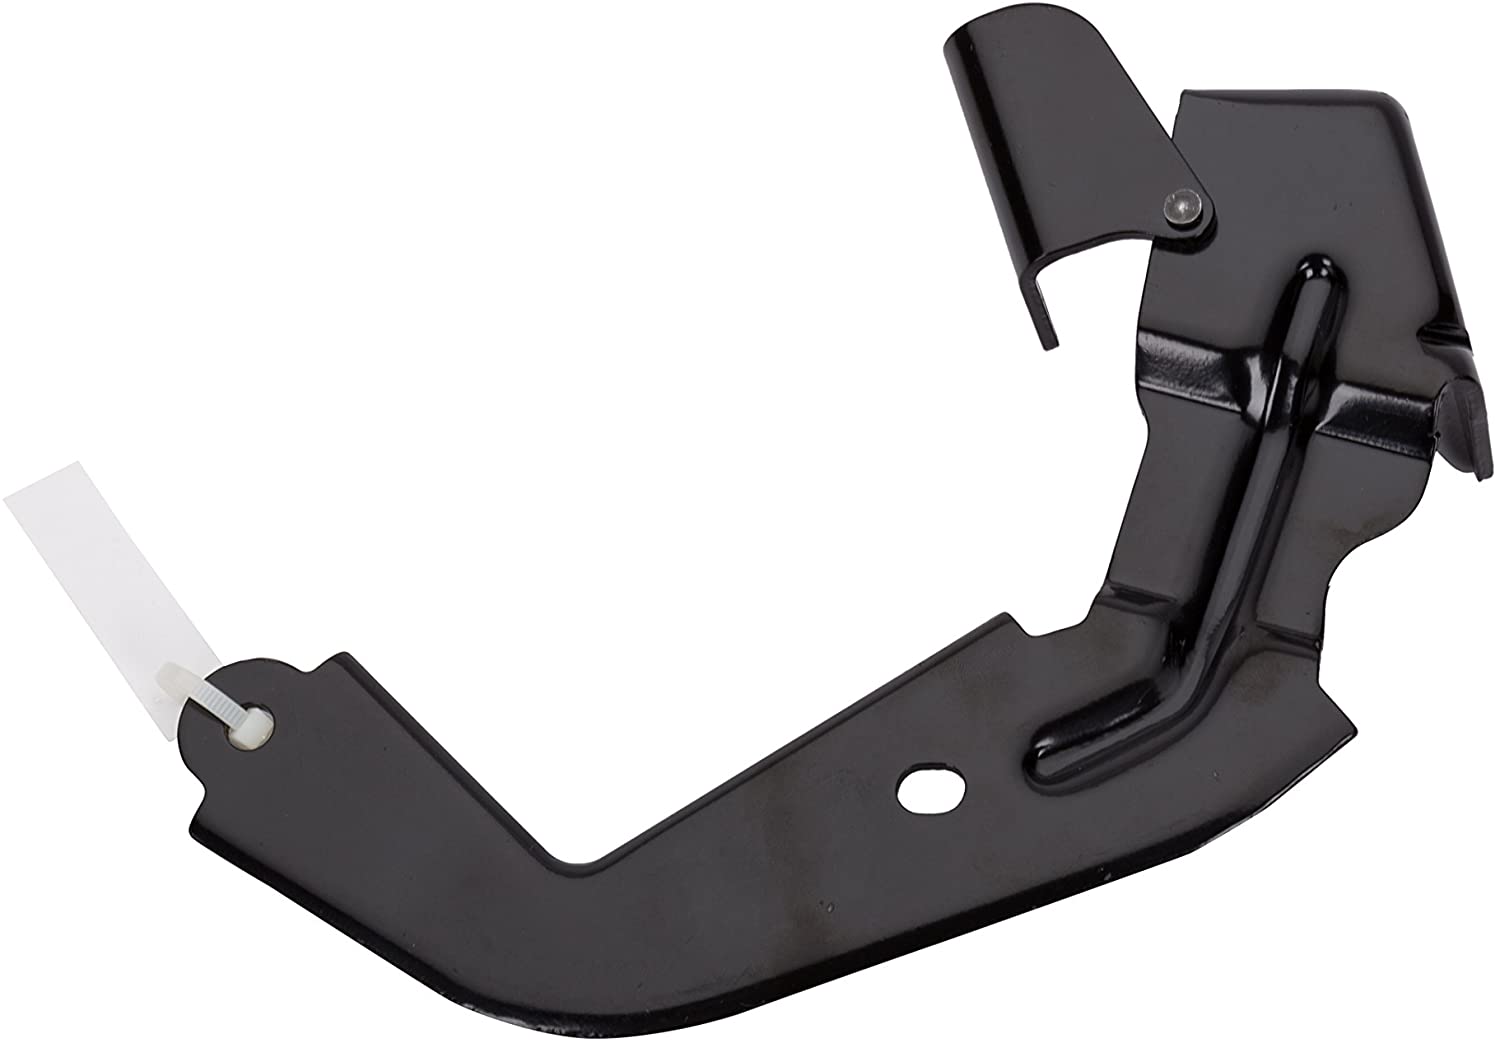 ACDelco 84122093 GM Original Equipment Automatic Transmission Range Selector Lever Cable Bracket